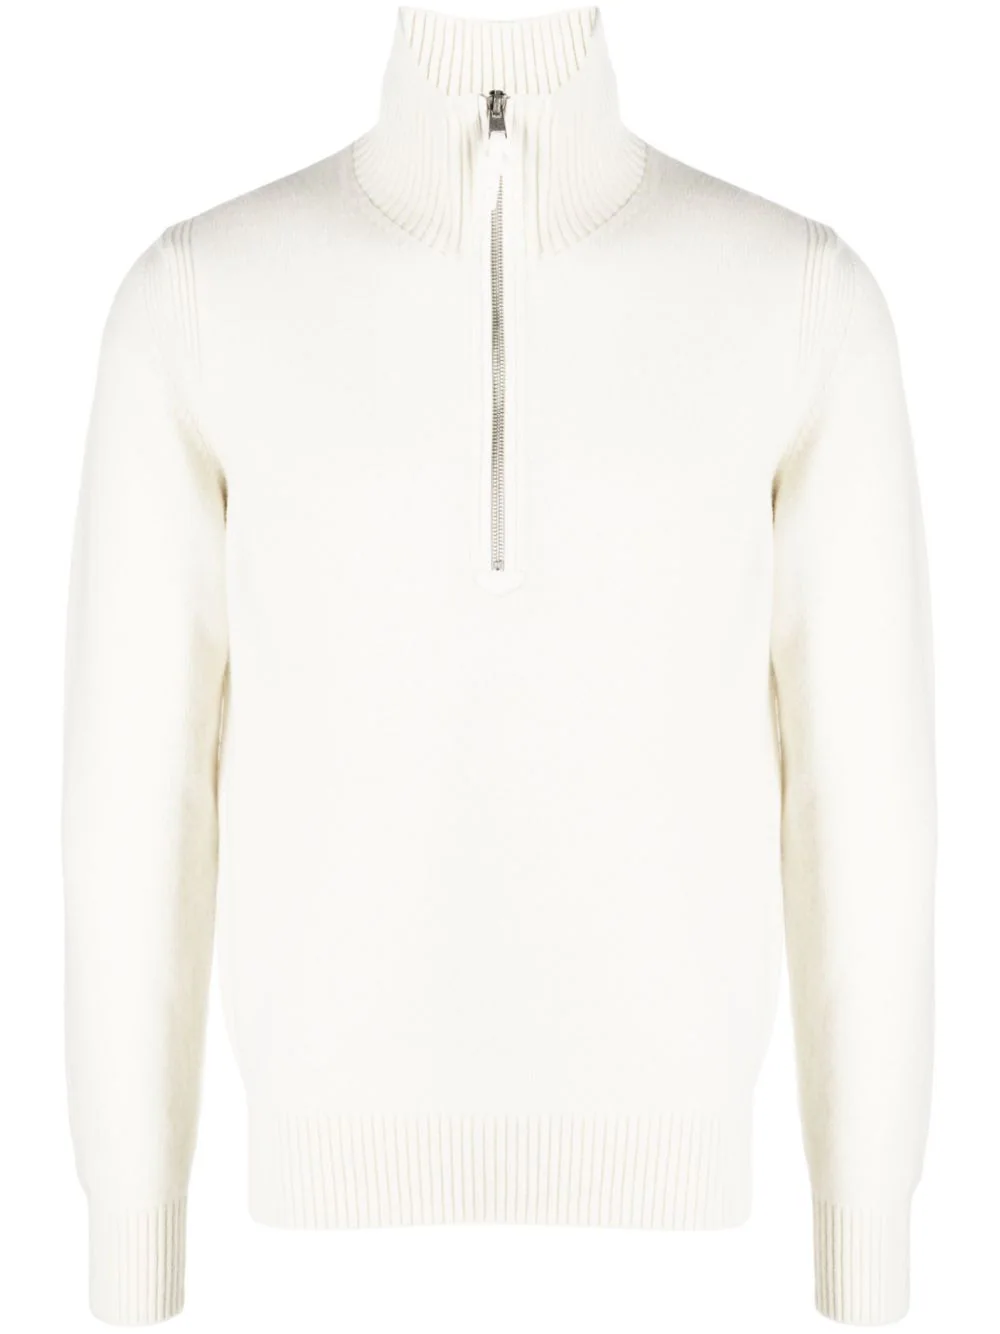 TOM FORD KNITTED SWEATER WITH HALF ZIP